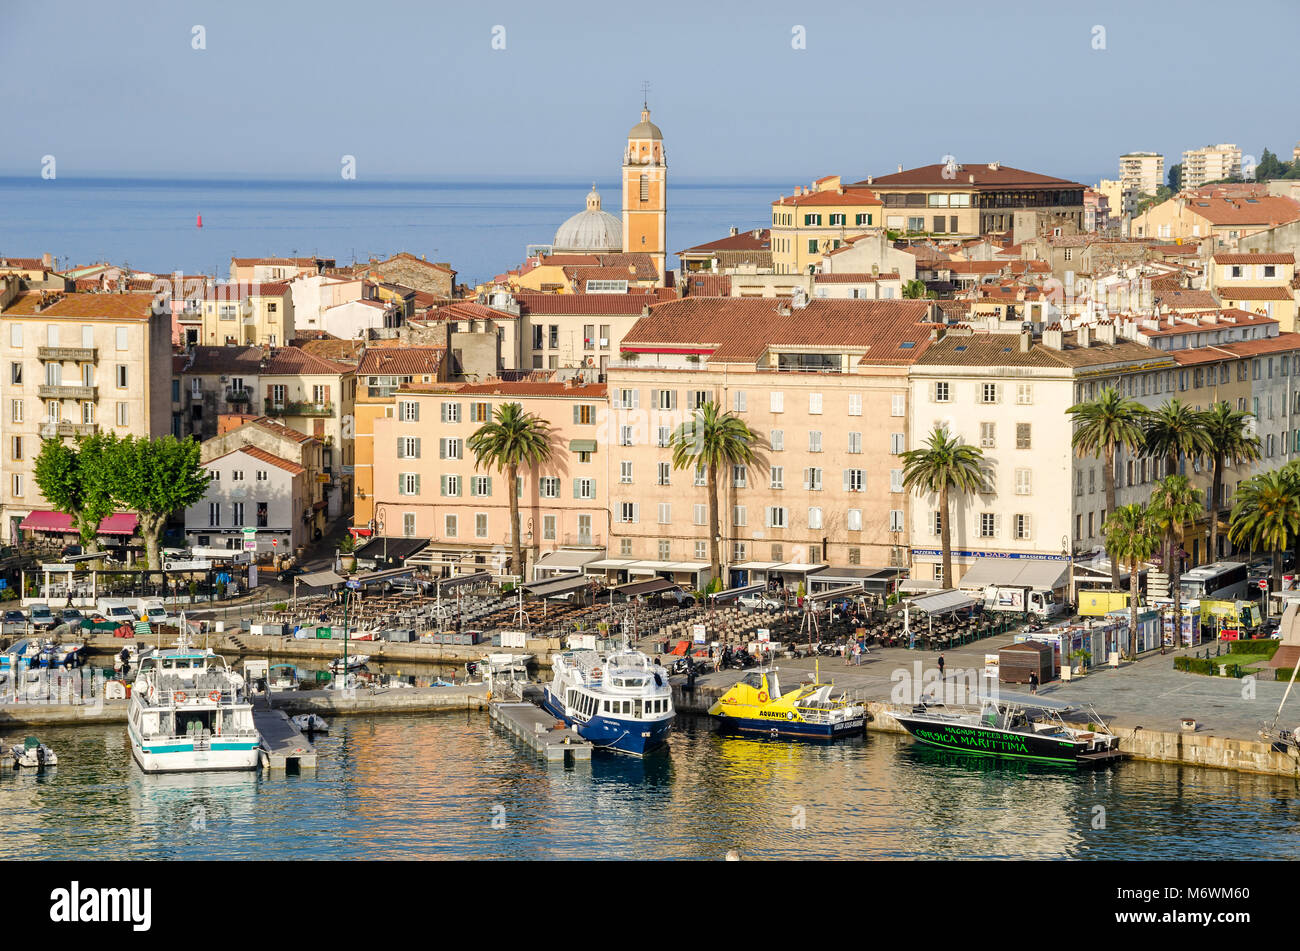 Ajaccio, France - May 27, 2016: View of the center of capital city of Corsica and birthplace of Napoleon Bonaparte with its marina and Fishing Port Stock Photo